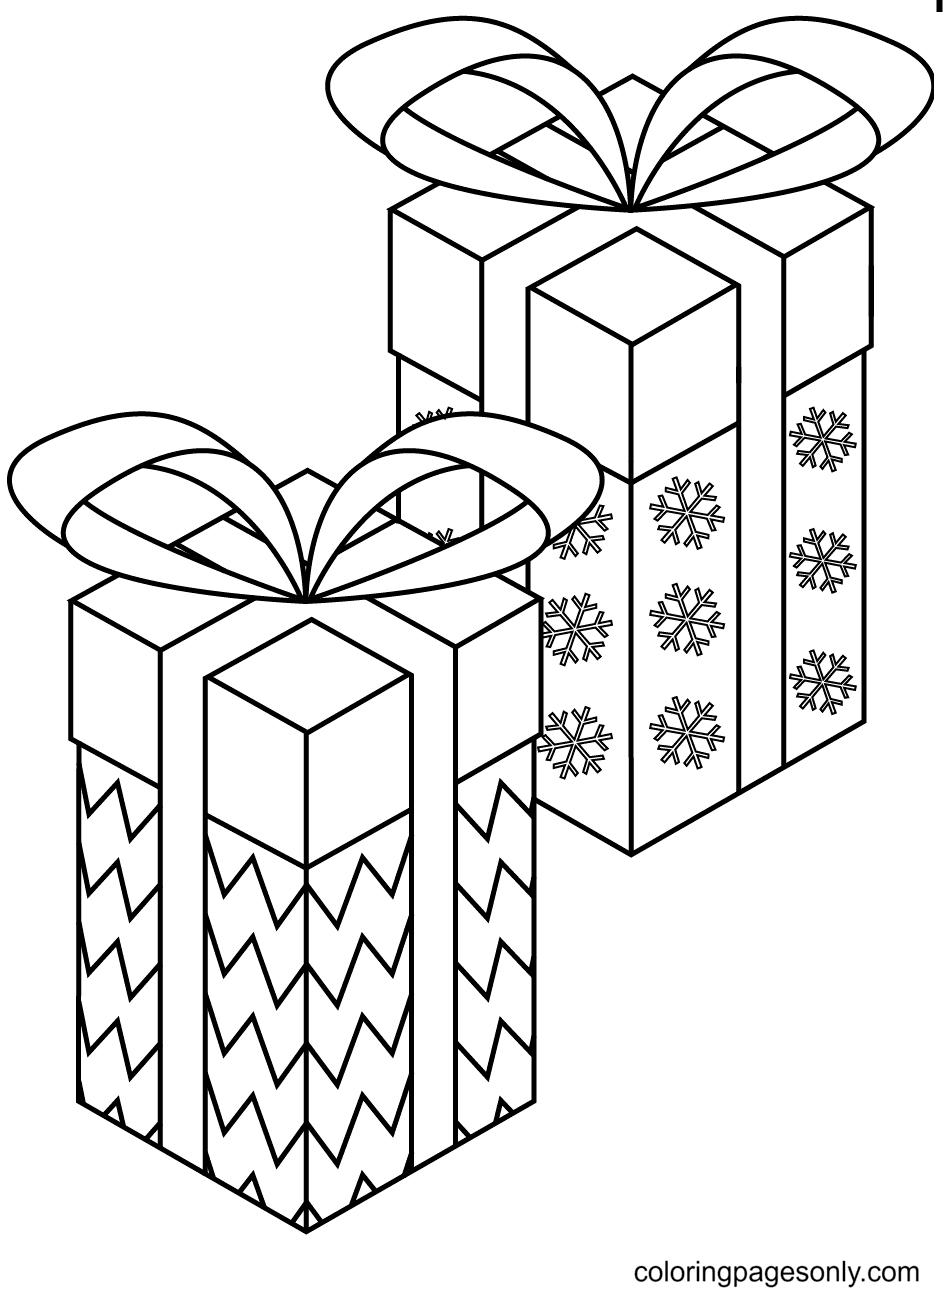 Lovely Christmas Gifts Coloring Pages